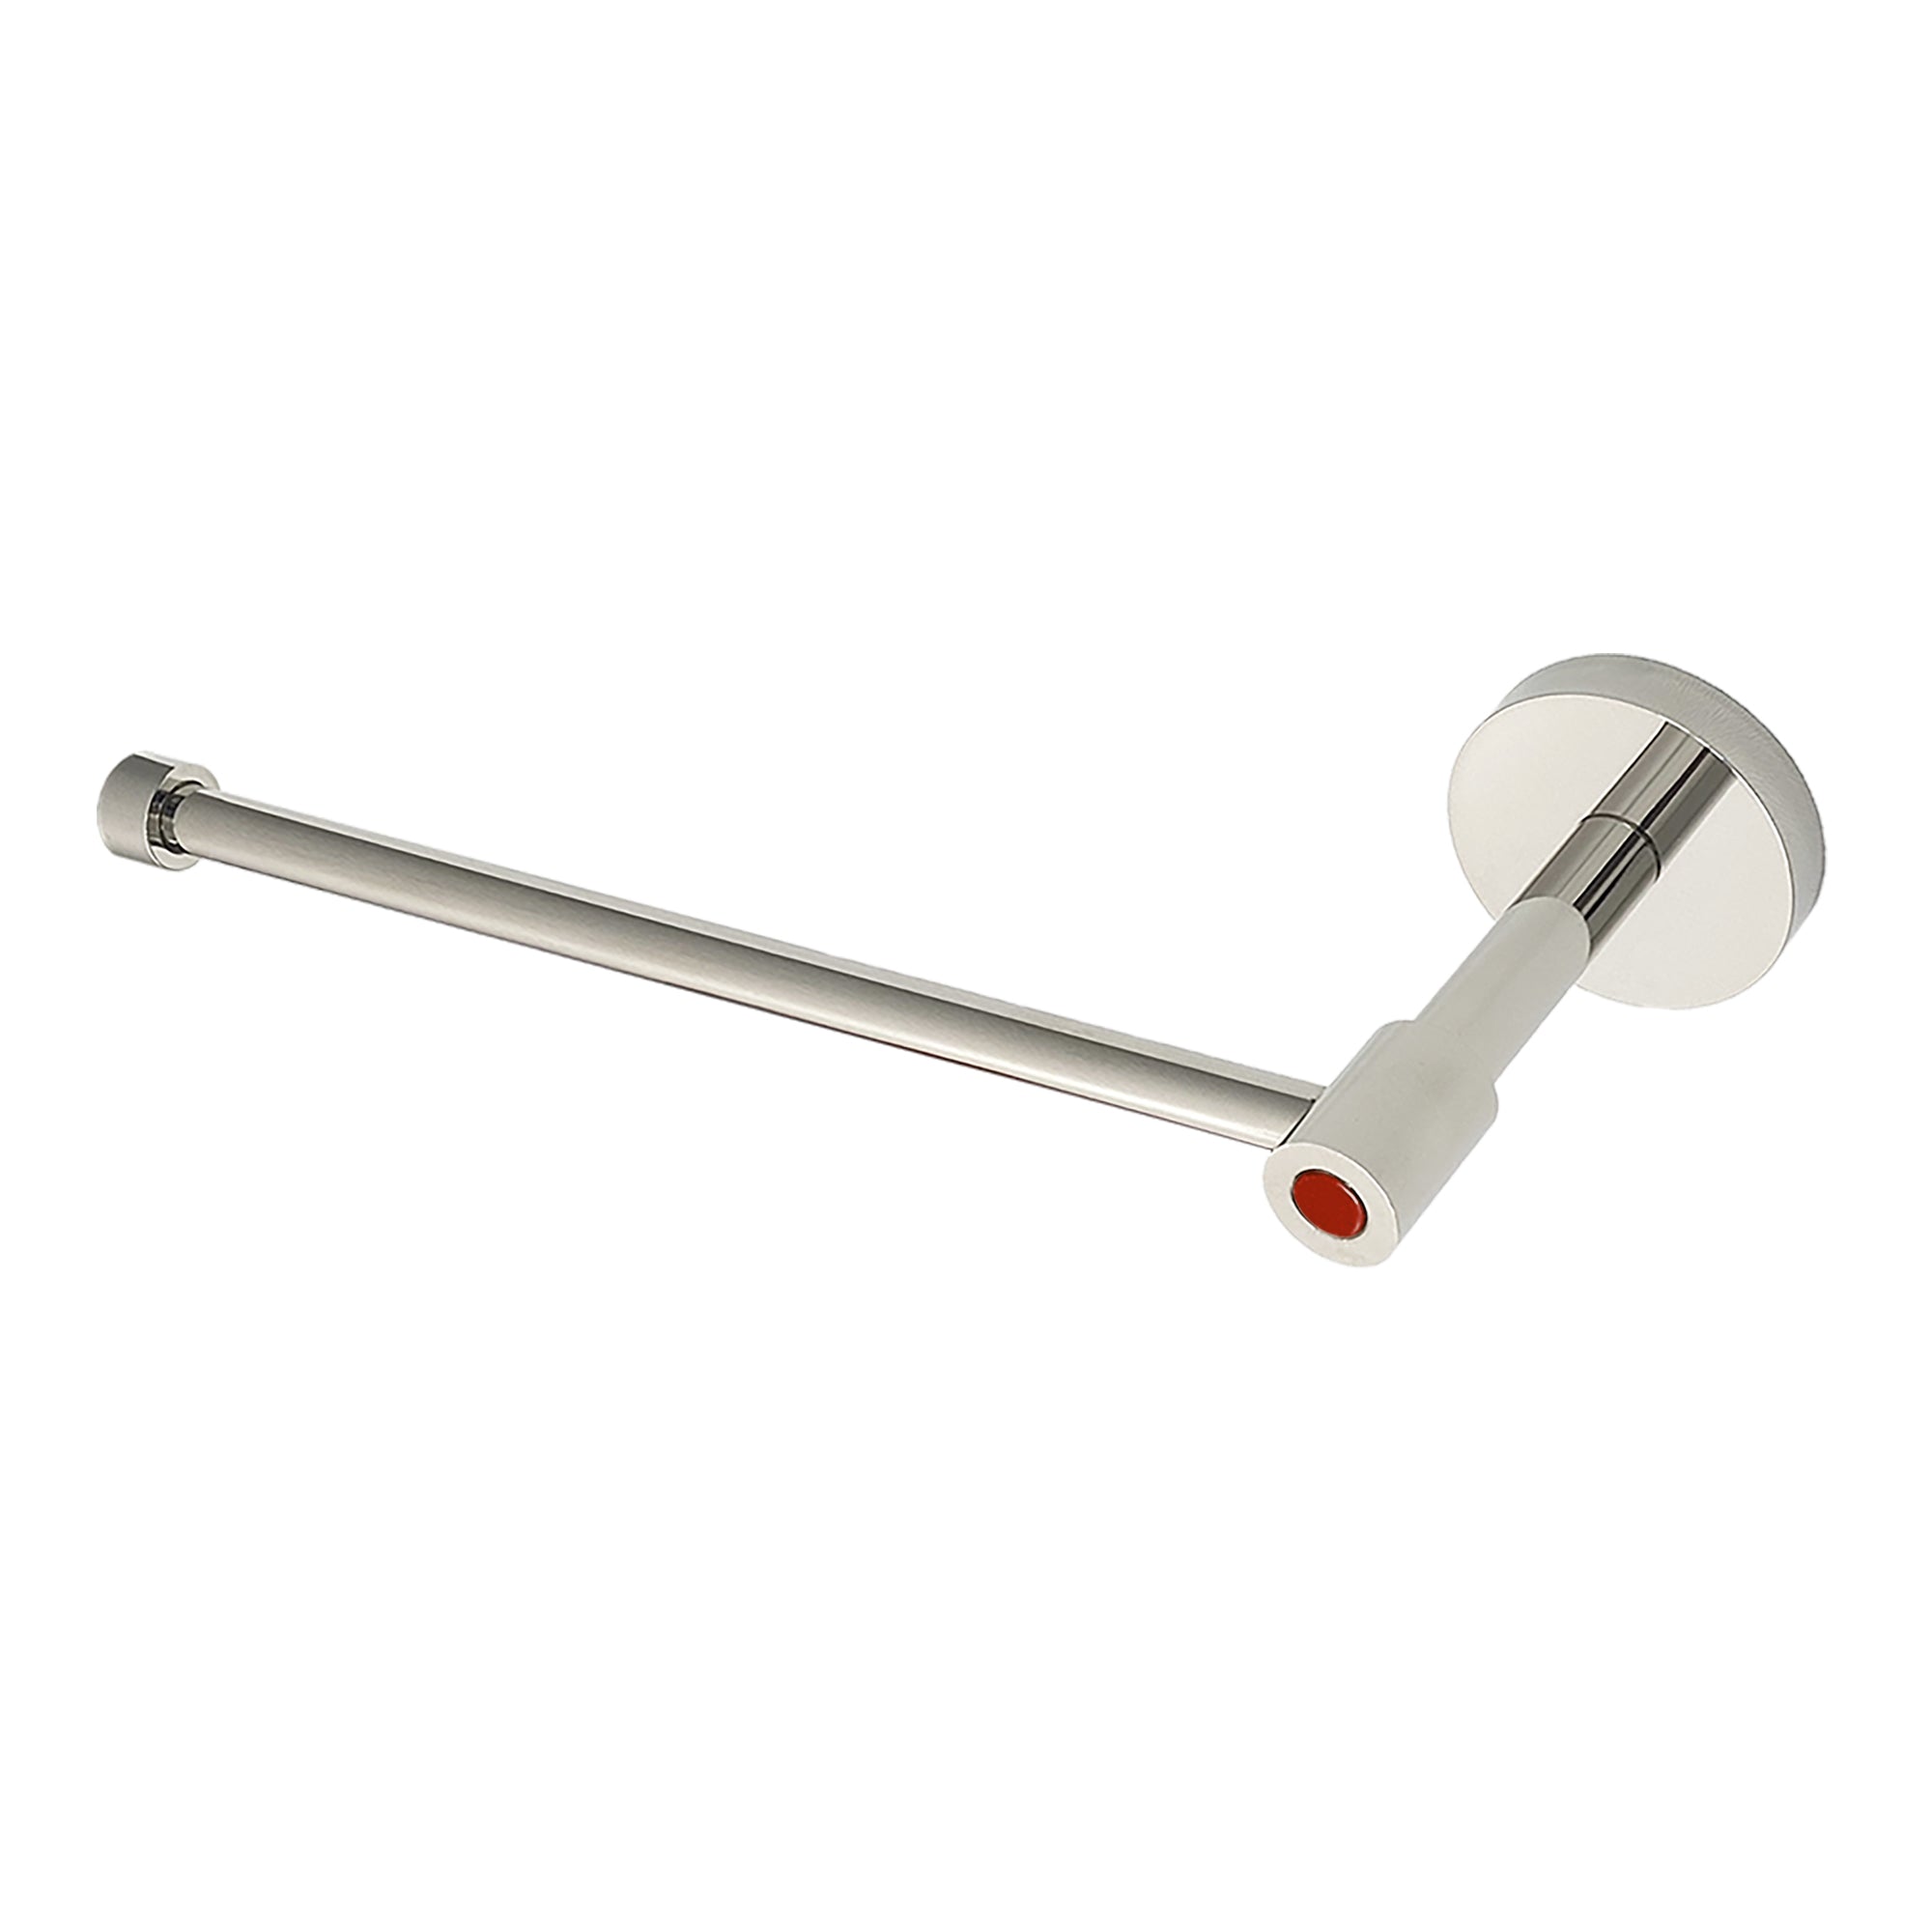 Nickel and riding hood red color Head hand towel bar Dutton Brown hardware